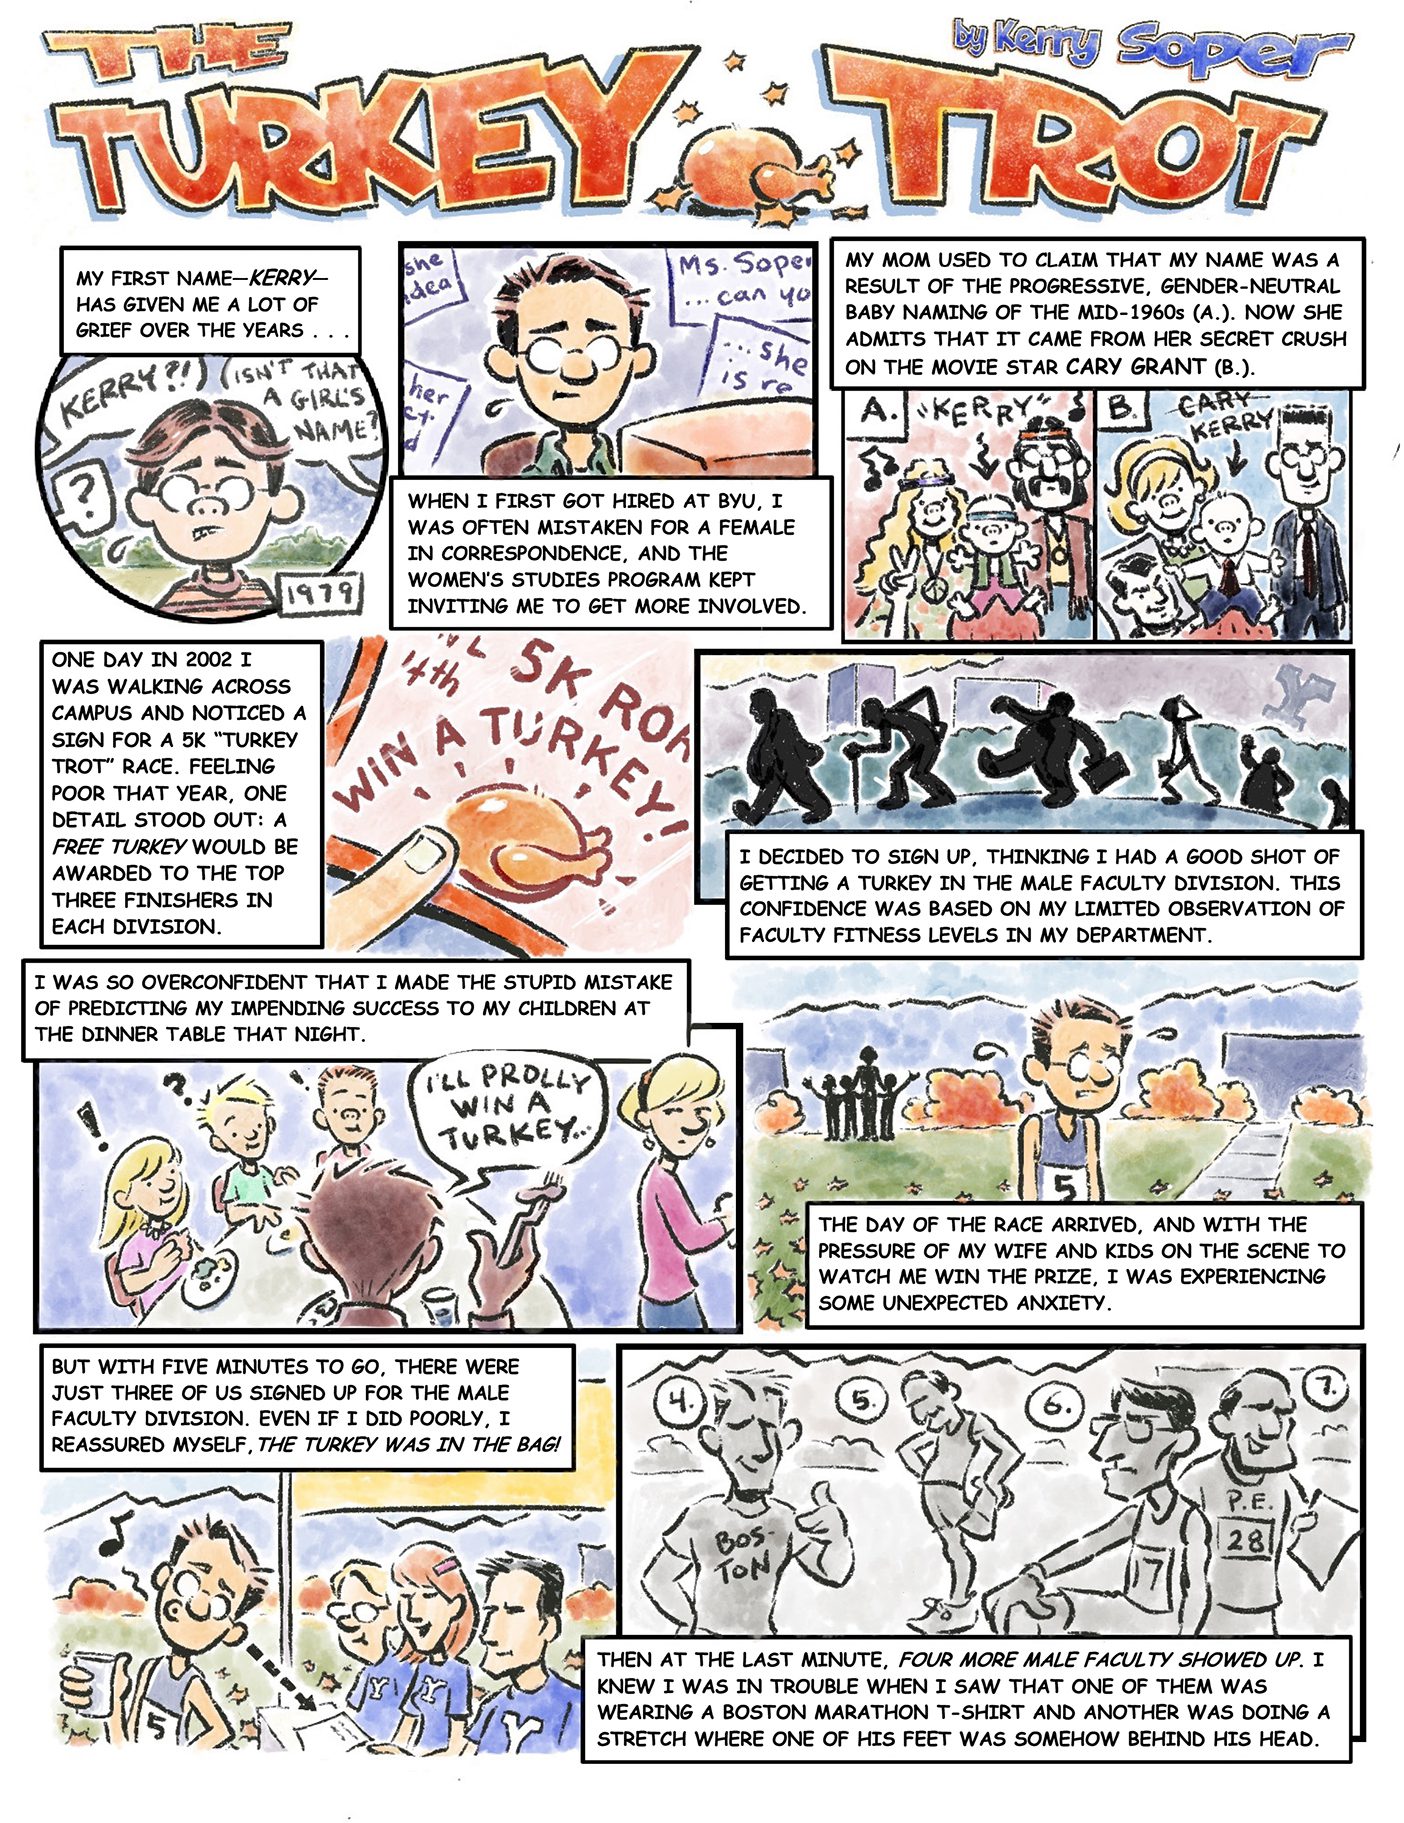 A Comic titled "The Turkey Trot" by Kerry Soper. Panel 1: Kerry, a middle-aged man is drawn breaking into a sweat as he reflects: “My first name--Kerry has given me a lot of grief over the years.” Behind him there are speech bubbles coming from people asking things such as: “Isn’t that a girl’s name?” Panel 2: Kerry sits in front of a computer screen, still breaking a sweat. And in the text box he continues to reflect over his name: “When I first got hired at BYU, I was often mistaken for a female in correspondence, and the women’s studies program kept inviting me to get more involved.” Panel 3: There are 2 different images here. Image A is a picture of two hippie parents and their baby son. The mom throws up a peace sign. Image B shows an average suburban-looking family of two parents and their baby boy. The baby boy is holding a picture of actor Cary Grant. The text box reads: “My mom used to claim that my name was a result of the progressive, gender-neutral baby naming of the mid-1960s (A.). Now she admits that it came from her secret crush on the movie star Cary Grant (B.)." Panel 4: A finger points to an orange flyer that reads “5K WIN A TURKEY”. The text box reads, “One day in 2002 I was walking across campus and noticed a sign for a 5K “Turkey Trot” race. Feeling poor that year, one detail stood out: a free turkey would be awarded to the top three finishers in each division.” Panel 5: The image shows a series of what presumably would be the silhouettes of BYU professors walking in front Y mountain. Most are overweight, or walking with some sort of impairment or difficulty. The text box reads: “I decided to sign up, thinking that I had a good shot of getting a turkey in the male faculty division. This confidence was based on my limited observation of faculty fitness levels in my department.” Panel 6: A family is shown sitting around the dinner table eating. Kerry is talking to his 3 children who have confused and amused looks on their faces while his wife is off to the side looking exasperated. A speech bubble coming from Kerry says, “I’ll prolly win a turkey . . . ” The text box reads: “I was so confident that I made the stupid mistake of predicting my impending success to my children at the dinner table that night.” Panel 7: Kerry is shown the day of the race in a running tank top with the number 5 on his chest. His shoulders are slumped, and he is breaking a sweat once again as fall leaves fall behind him. The outline of his family waves to him from the sidelines. The text box reads: “The day of the race arrived, and with the pressure of my wife and kids on the scene to watch me win the prize, I was experiencing some unexpected anxiety.” Panel 8: Kerry stands in front of the registration table, where 3 students are checking people in. He is relaxed, holds some sort of cup and is singing. The text box reads: “But with five minutes to go, there were just three of us signed up for the male faculty division. Even if I did poorly, I reassured myself, the turkey was in the bag!" Panel 9: This art is in black and white. It depicts 4 men in good shape, stretching, flexing, and wearing t-shirts that say things such as “Boston” and “P.E.”. The text box reads: “Then at the last minute, four more male faculty showed up. I knew I was in trouble when I saw that one of them was wearing a Boston Marathon t-shirt and another was doing a stretch where one of his feet was somehow behind his head.”